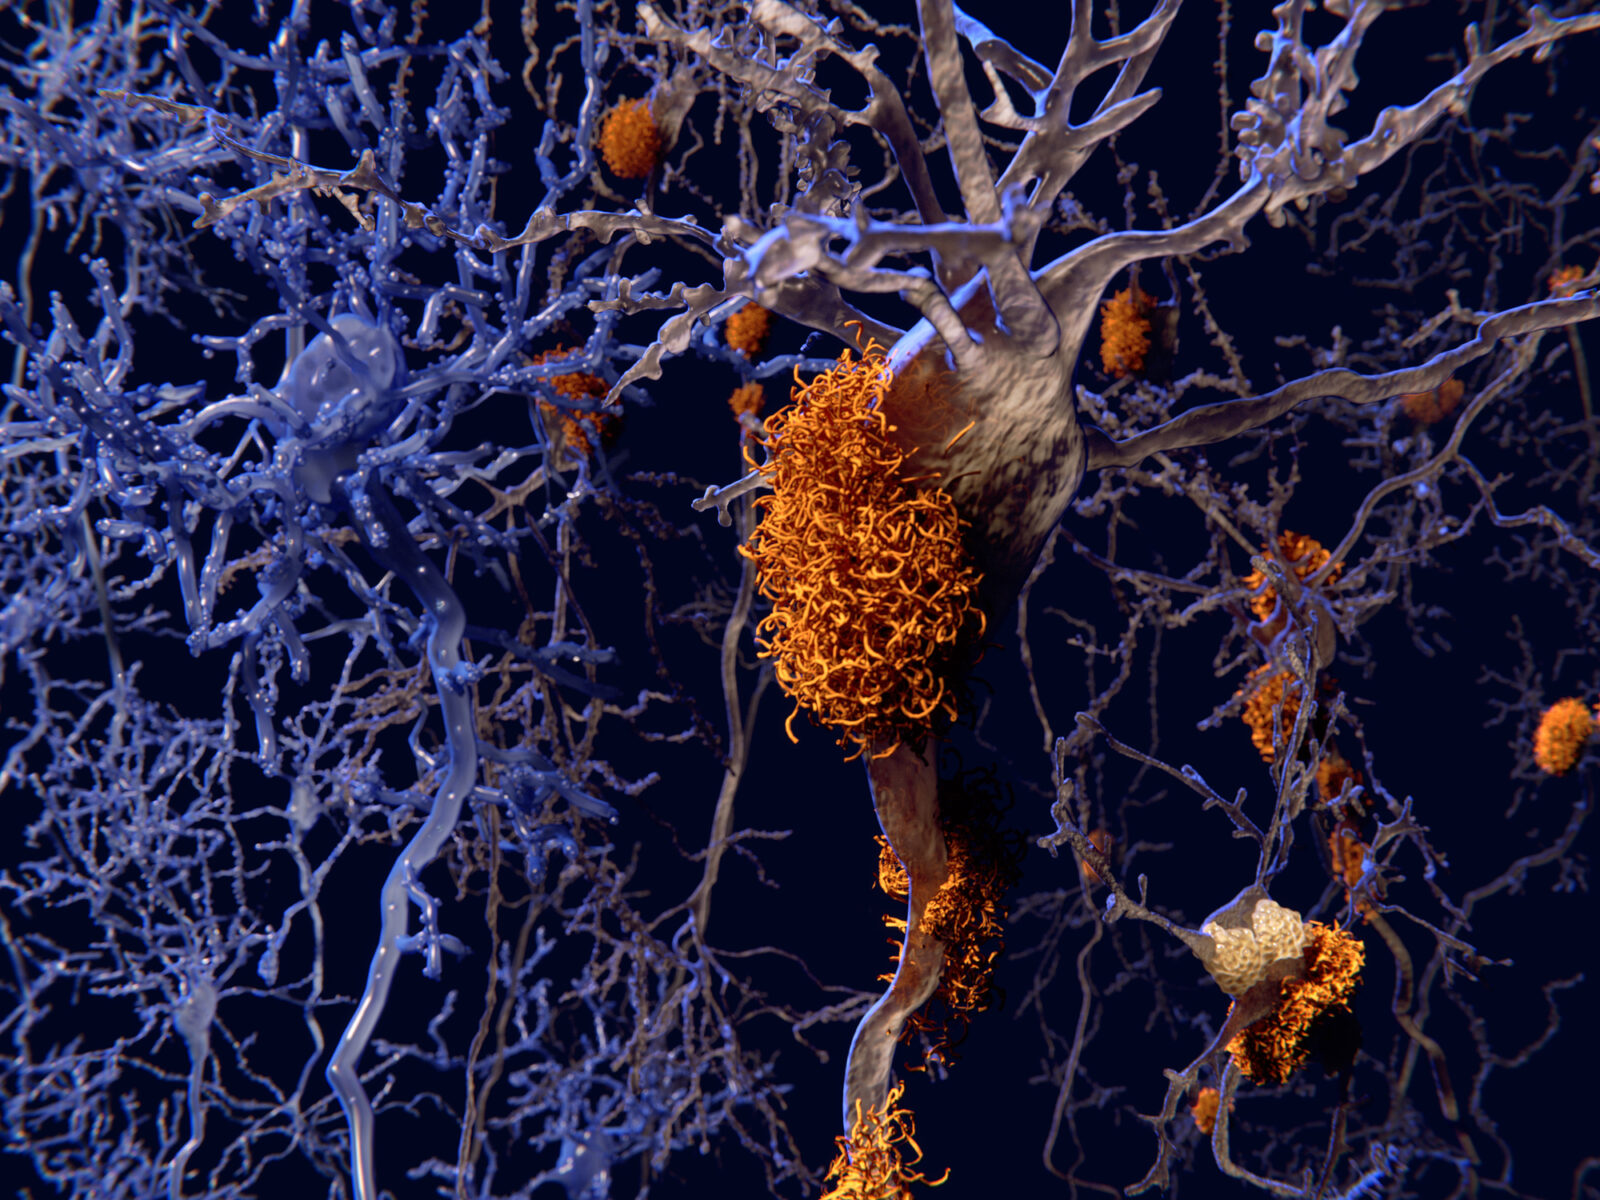 Neurons with amyloid plaques compared to healthy neurons. Amyloid plaques accumulate outside neurons. Amyloid plaques are characteristic features of Alzheimer's disease. They lead to a degeneration of the affected neurons, that are destroyed through the activity of microglia cells.